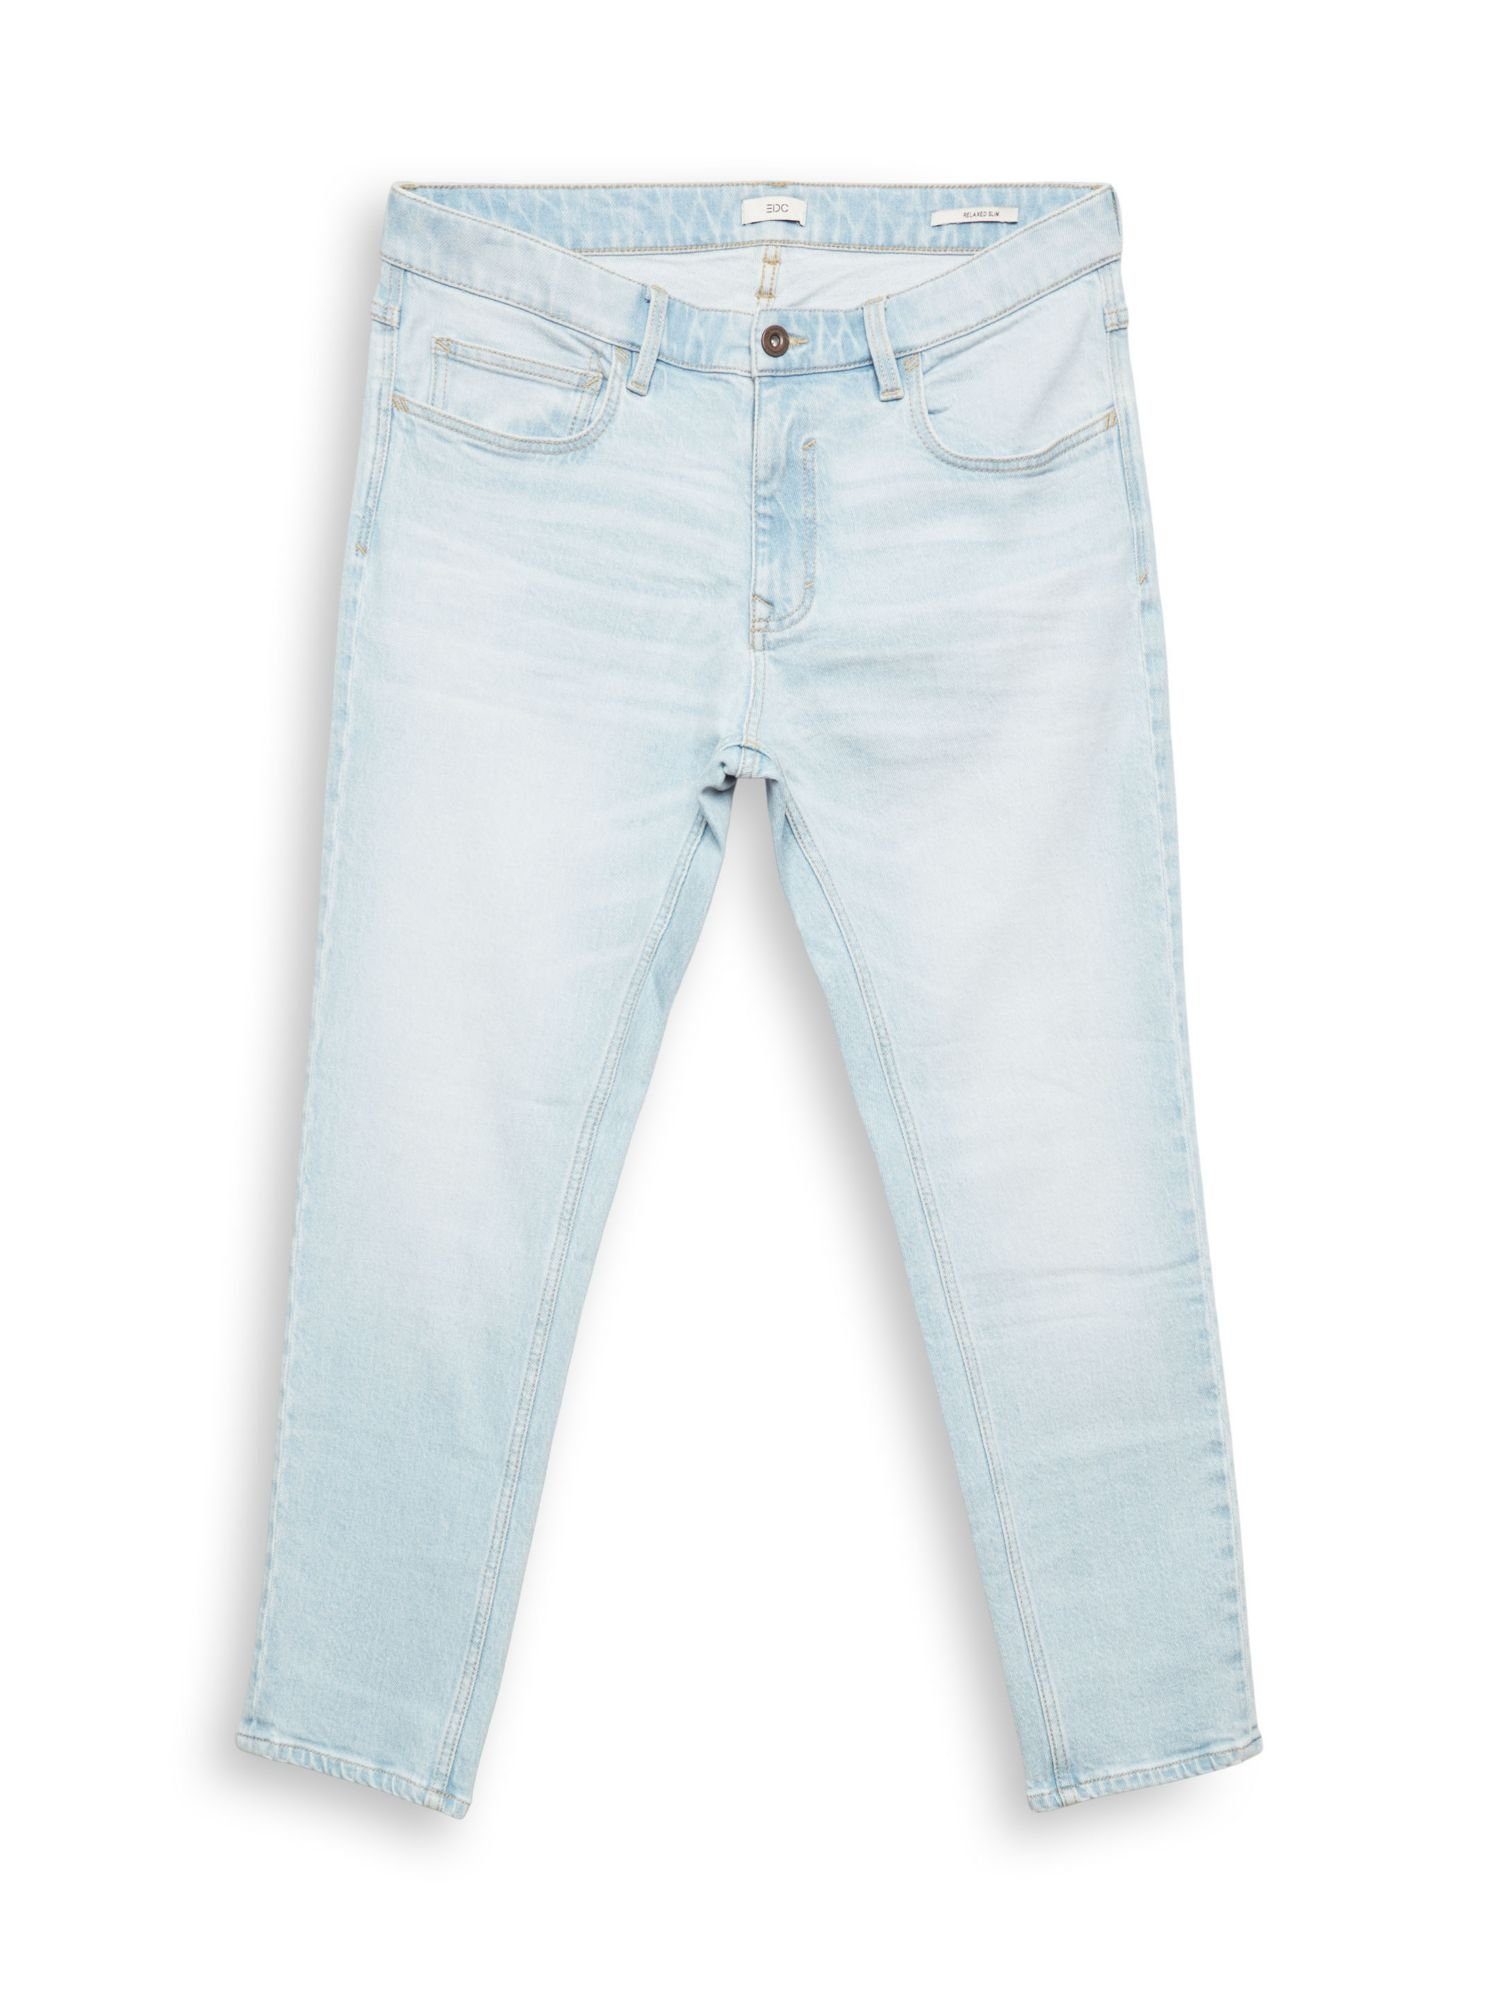 edc by Esprit BLUE Stretch-Jeans Stretch-Jeans BLEACHED